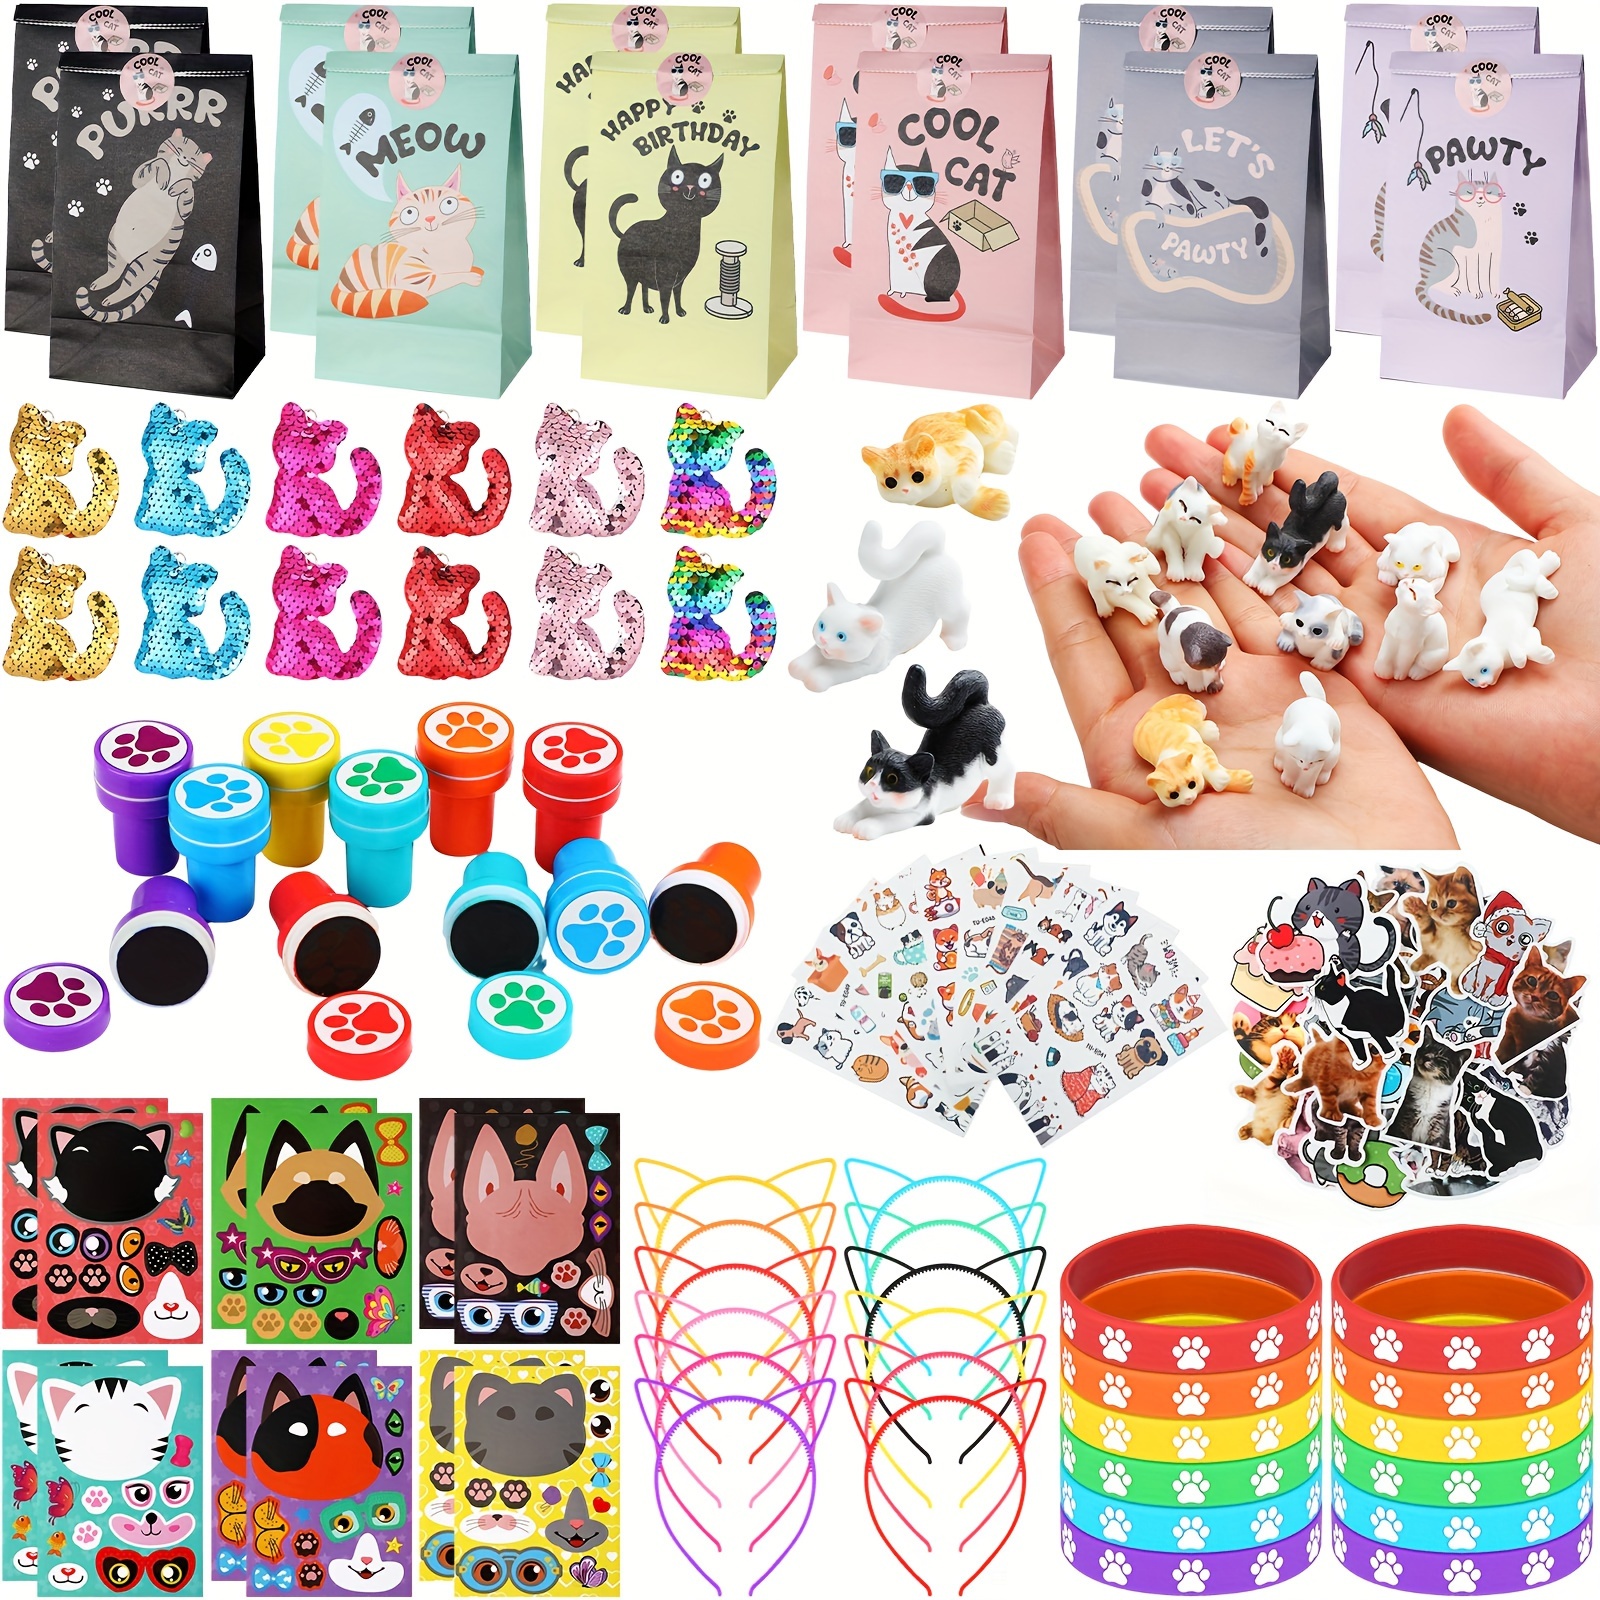 

166 Pcs Cat Party Favor Set Cat Party Supplies Include Cat Toy Sequin Keychain Sticker Silicone Bracelet Headband Expression Stickers Tattoo Stamper Paper Bag For Girls Boys Birthday Party